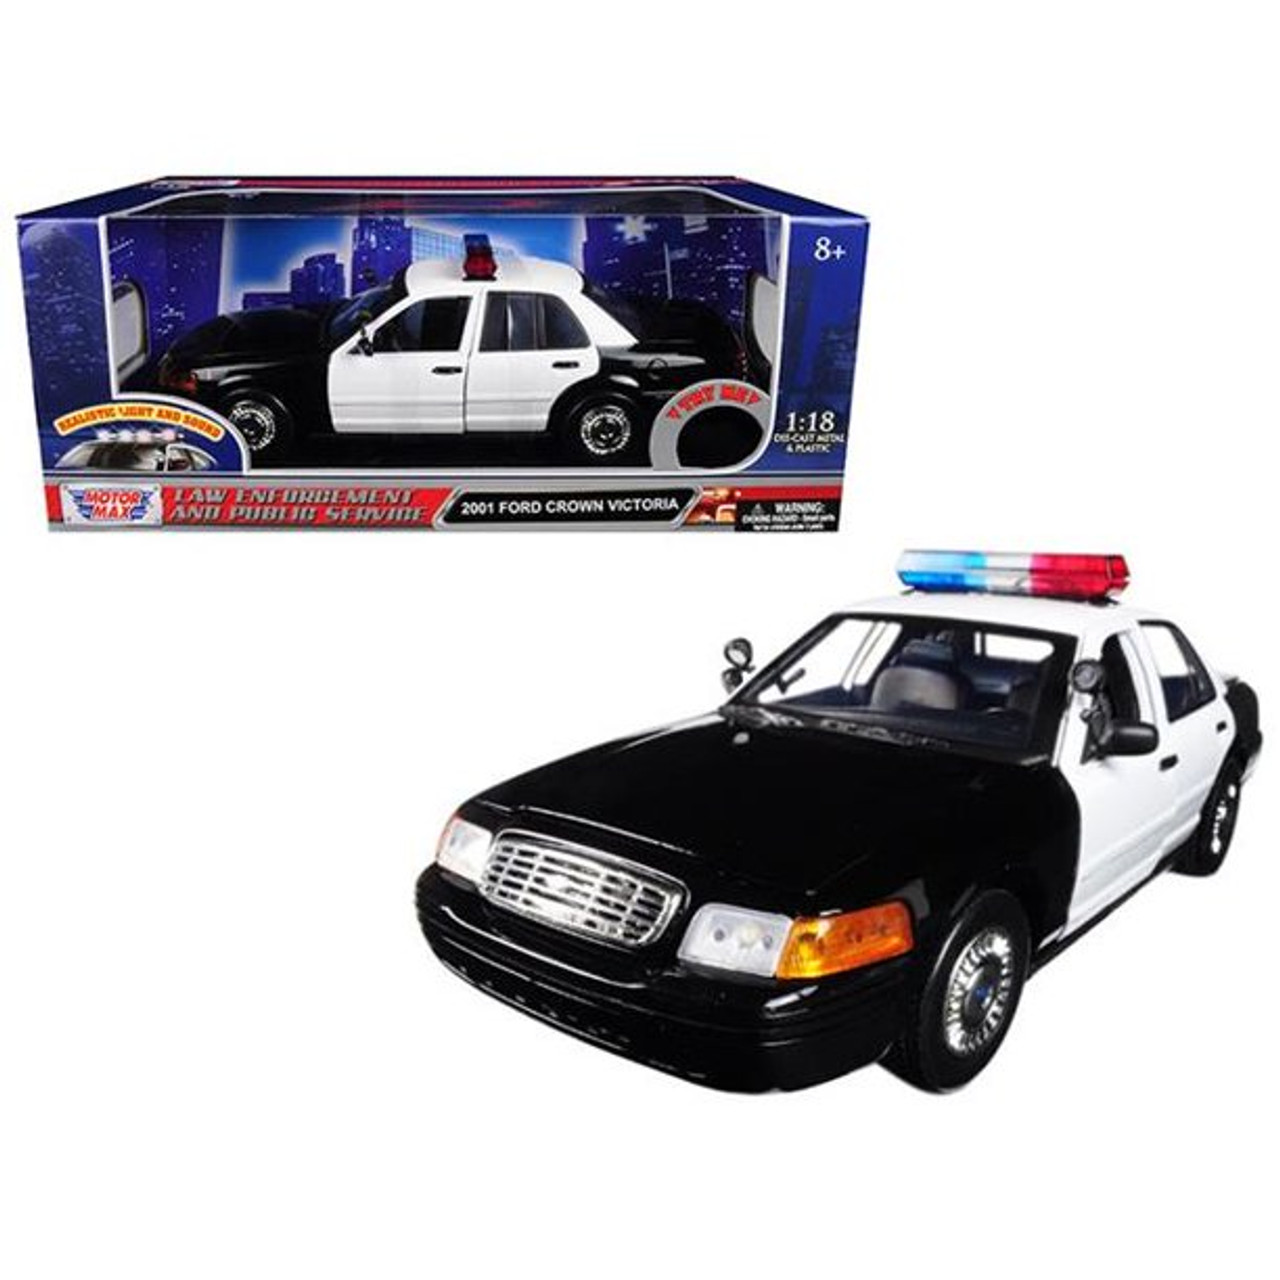 1/18 Motormax 2001 Ford Crown Victoria Police Diecast Model Car with Front & Rear Lights & Sound (Black & White) Diecast Car Model